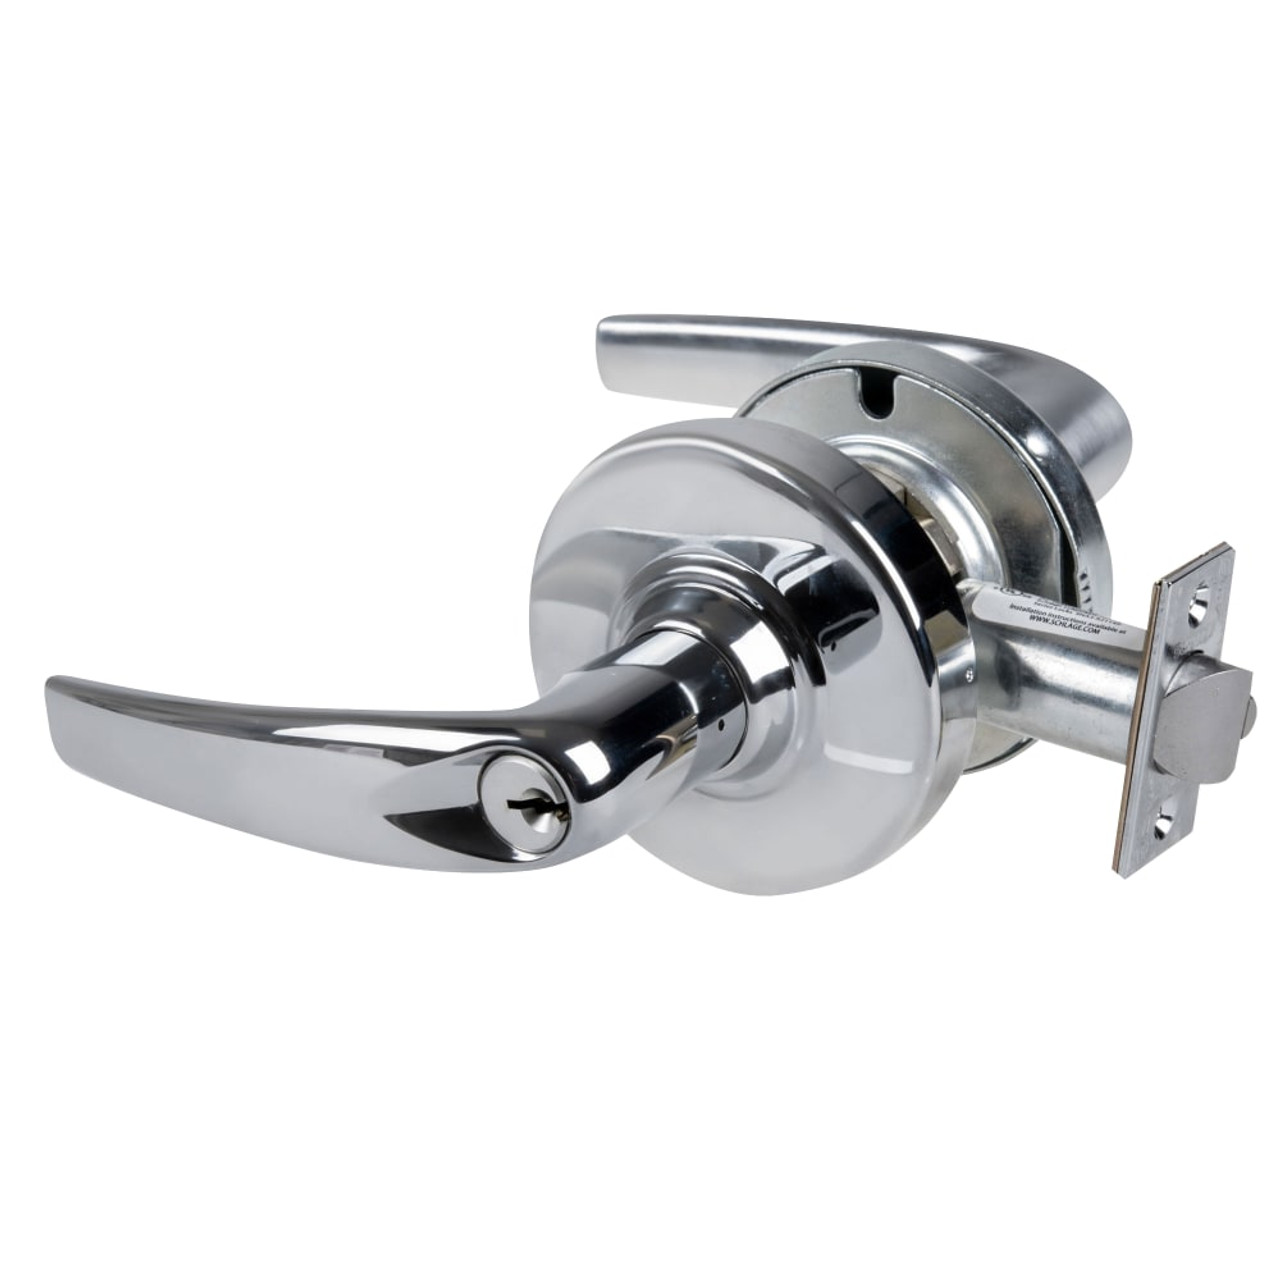 Schlage ALX53P ATH 625 Grade 2 Entrance Cylindrical Lock with Field  Selectable Vandlgard, Athens Lever, Conventional Cylinder, Bright Chrome  Finish, Non-handed